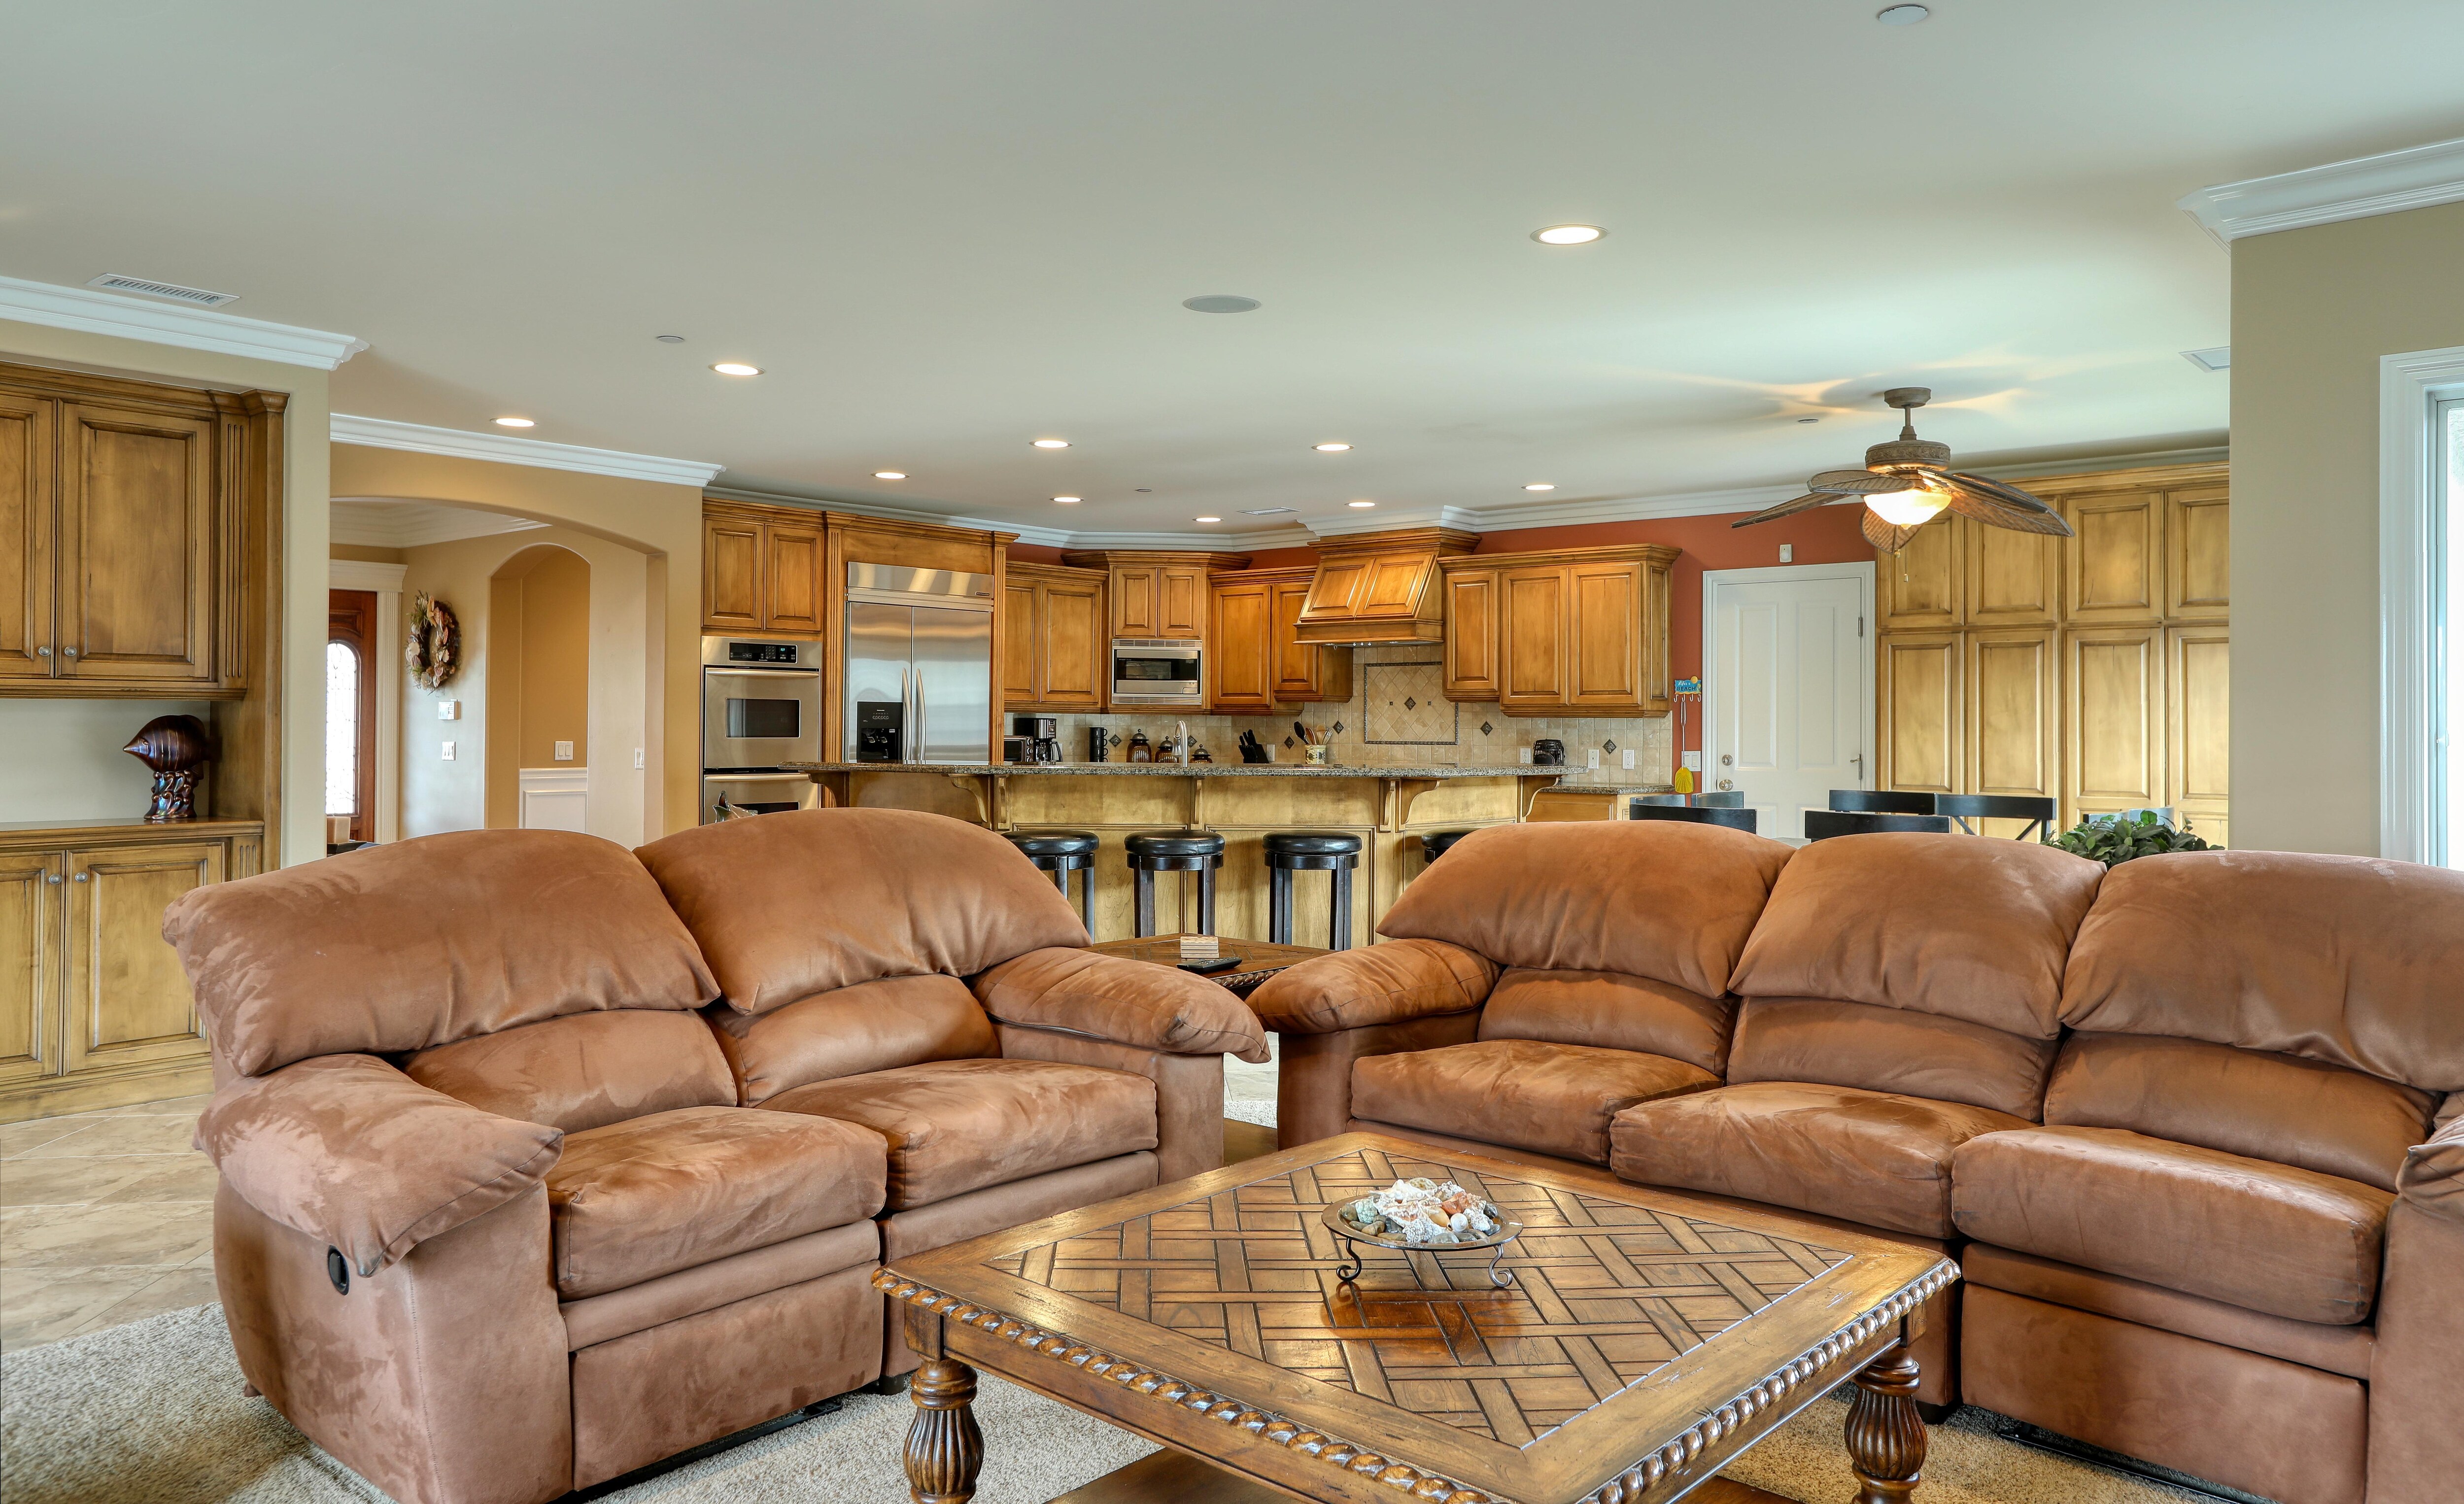 A spacious great room with ample lounging furniture.